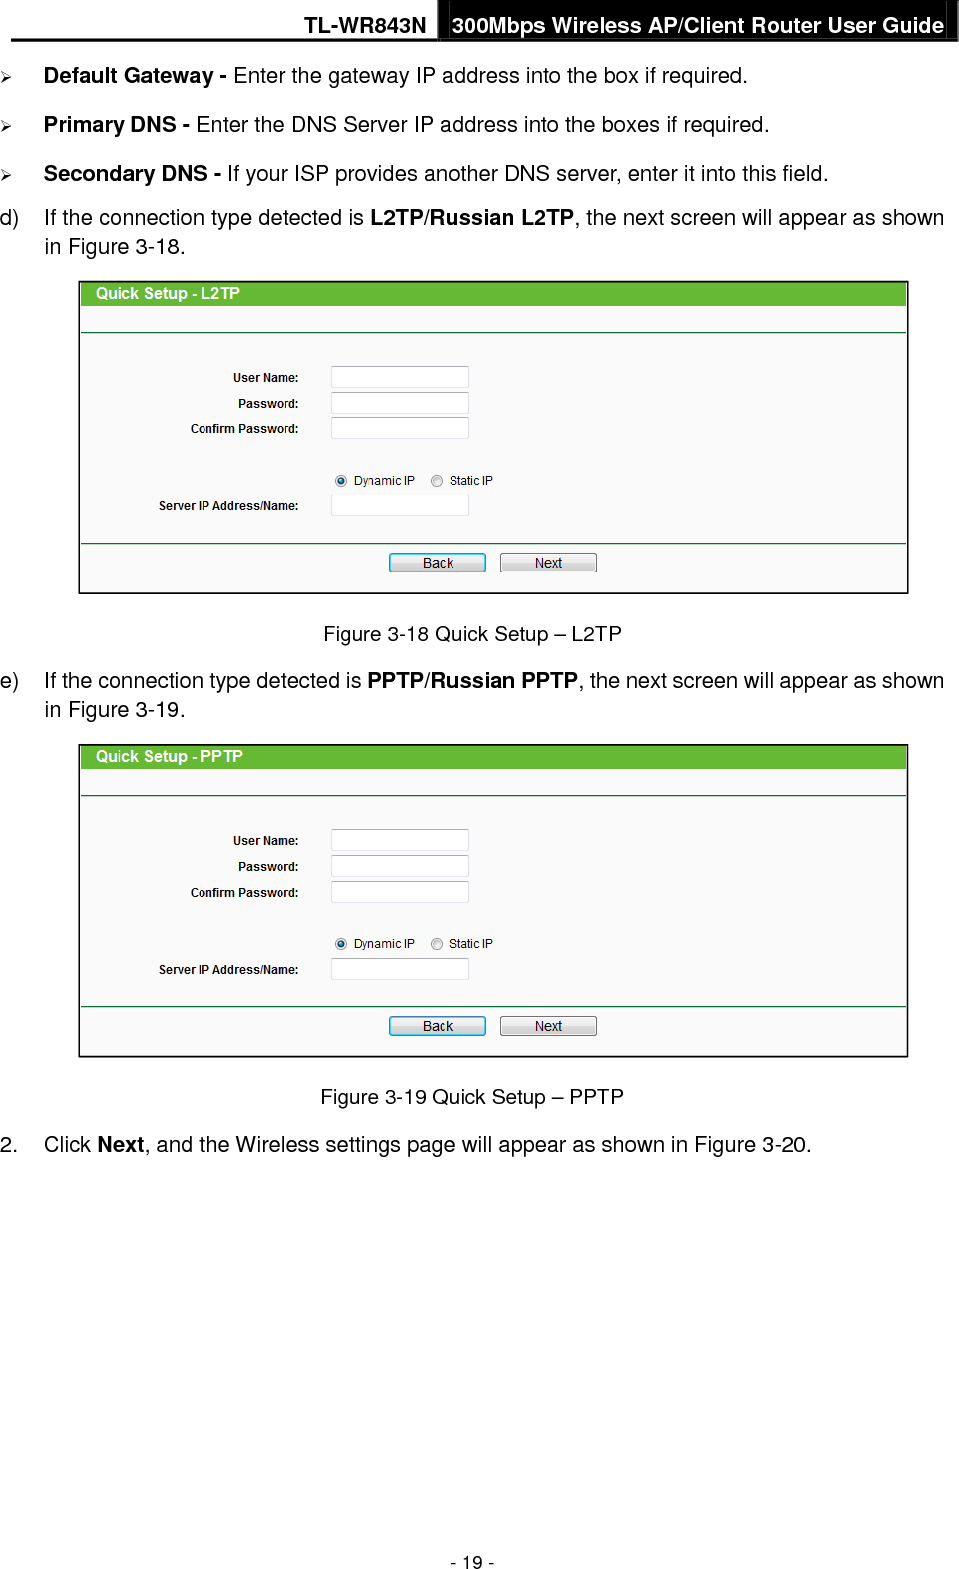 TL-WR843N 300Mbps Wireless AP/Client Router User Guide - 19 - Default Gateway - Enter the gateway IP address into the box if required.Primary DNS - Enter the DNS Server IP address into the boxes if required.Secondary DNS - If your ISP provides another DNS server, enter it into this field.d) If the connection type detected is L2TP/Russian L2TP, the next screen will appear as shownin Figure 3-18.Figure 3-18 Quick Setup – L2TP e) If the connection type detected is PPTP/Russian PPTP, the next screen will appear as shownin Figure 3-19.Figure 3-19 Quick Setup – PPTP 2. Click Next, and the Wireless settings page will appear as shown in Figure 3-20.